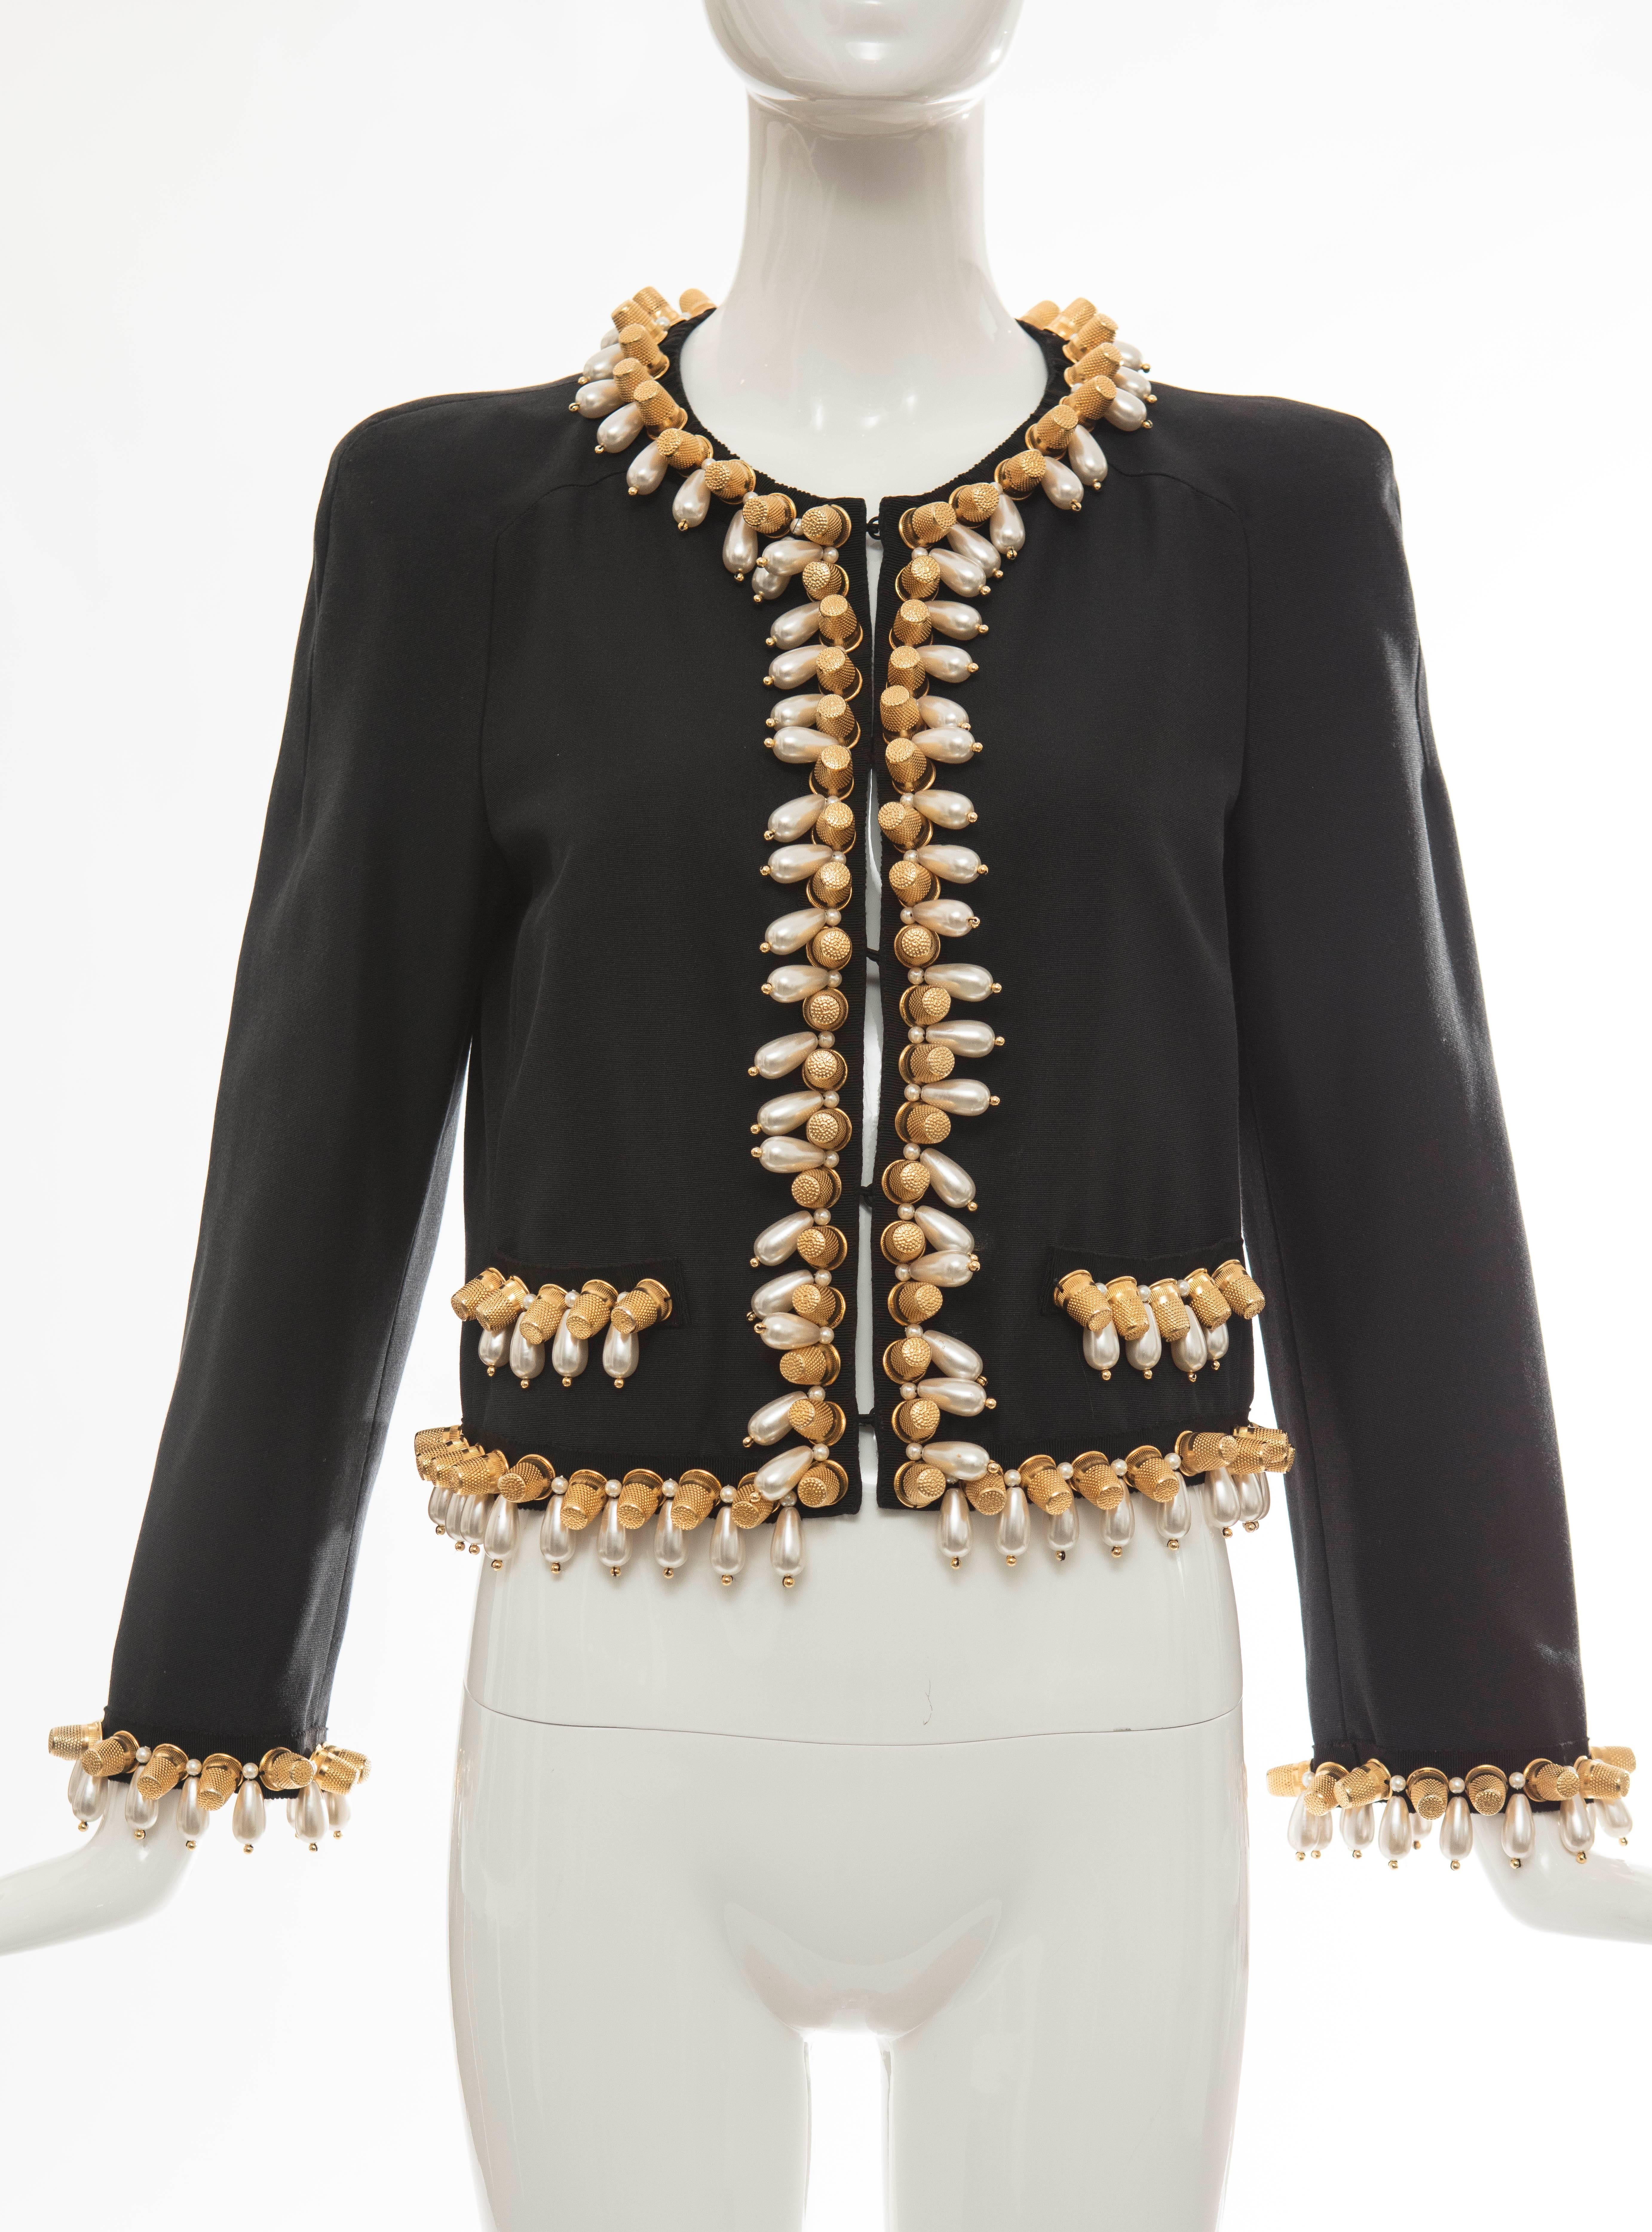 Jeremy Scott for Moschino black jacket with trim featuring gold-tone thimble and pearl adornments, hook closures at front and fully lined.

Measurements: Bust 37”, Waist 34”, Shoulder 15”, Length 18”

Fabric Content: 74% Cotton, 36% Silk; Lining